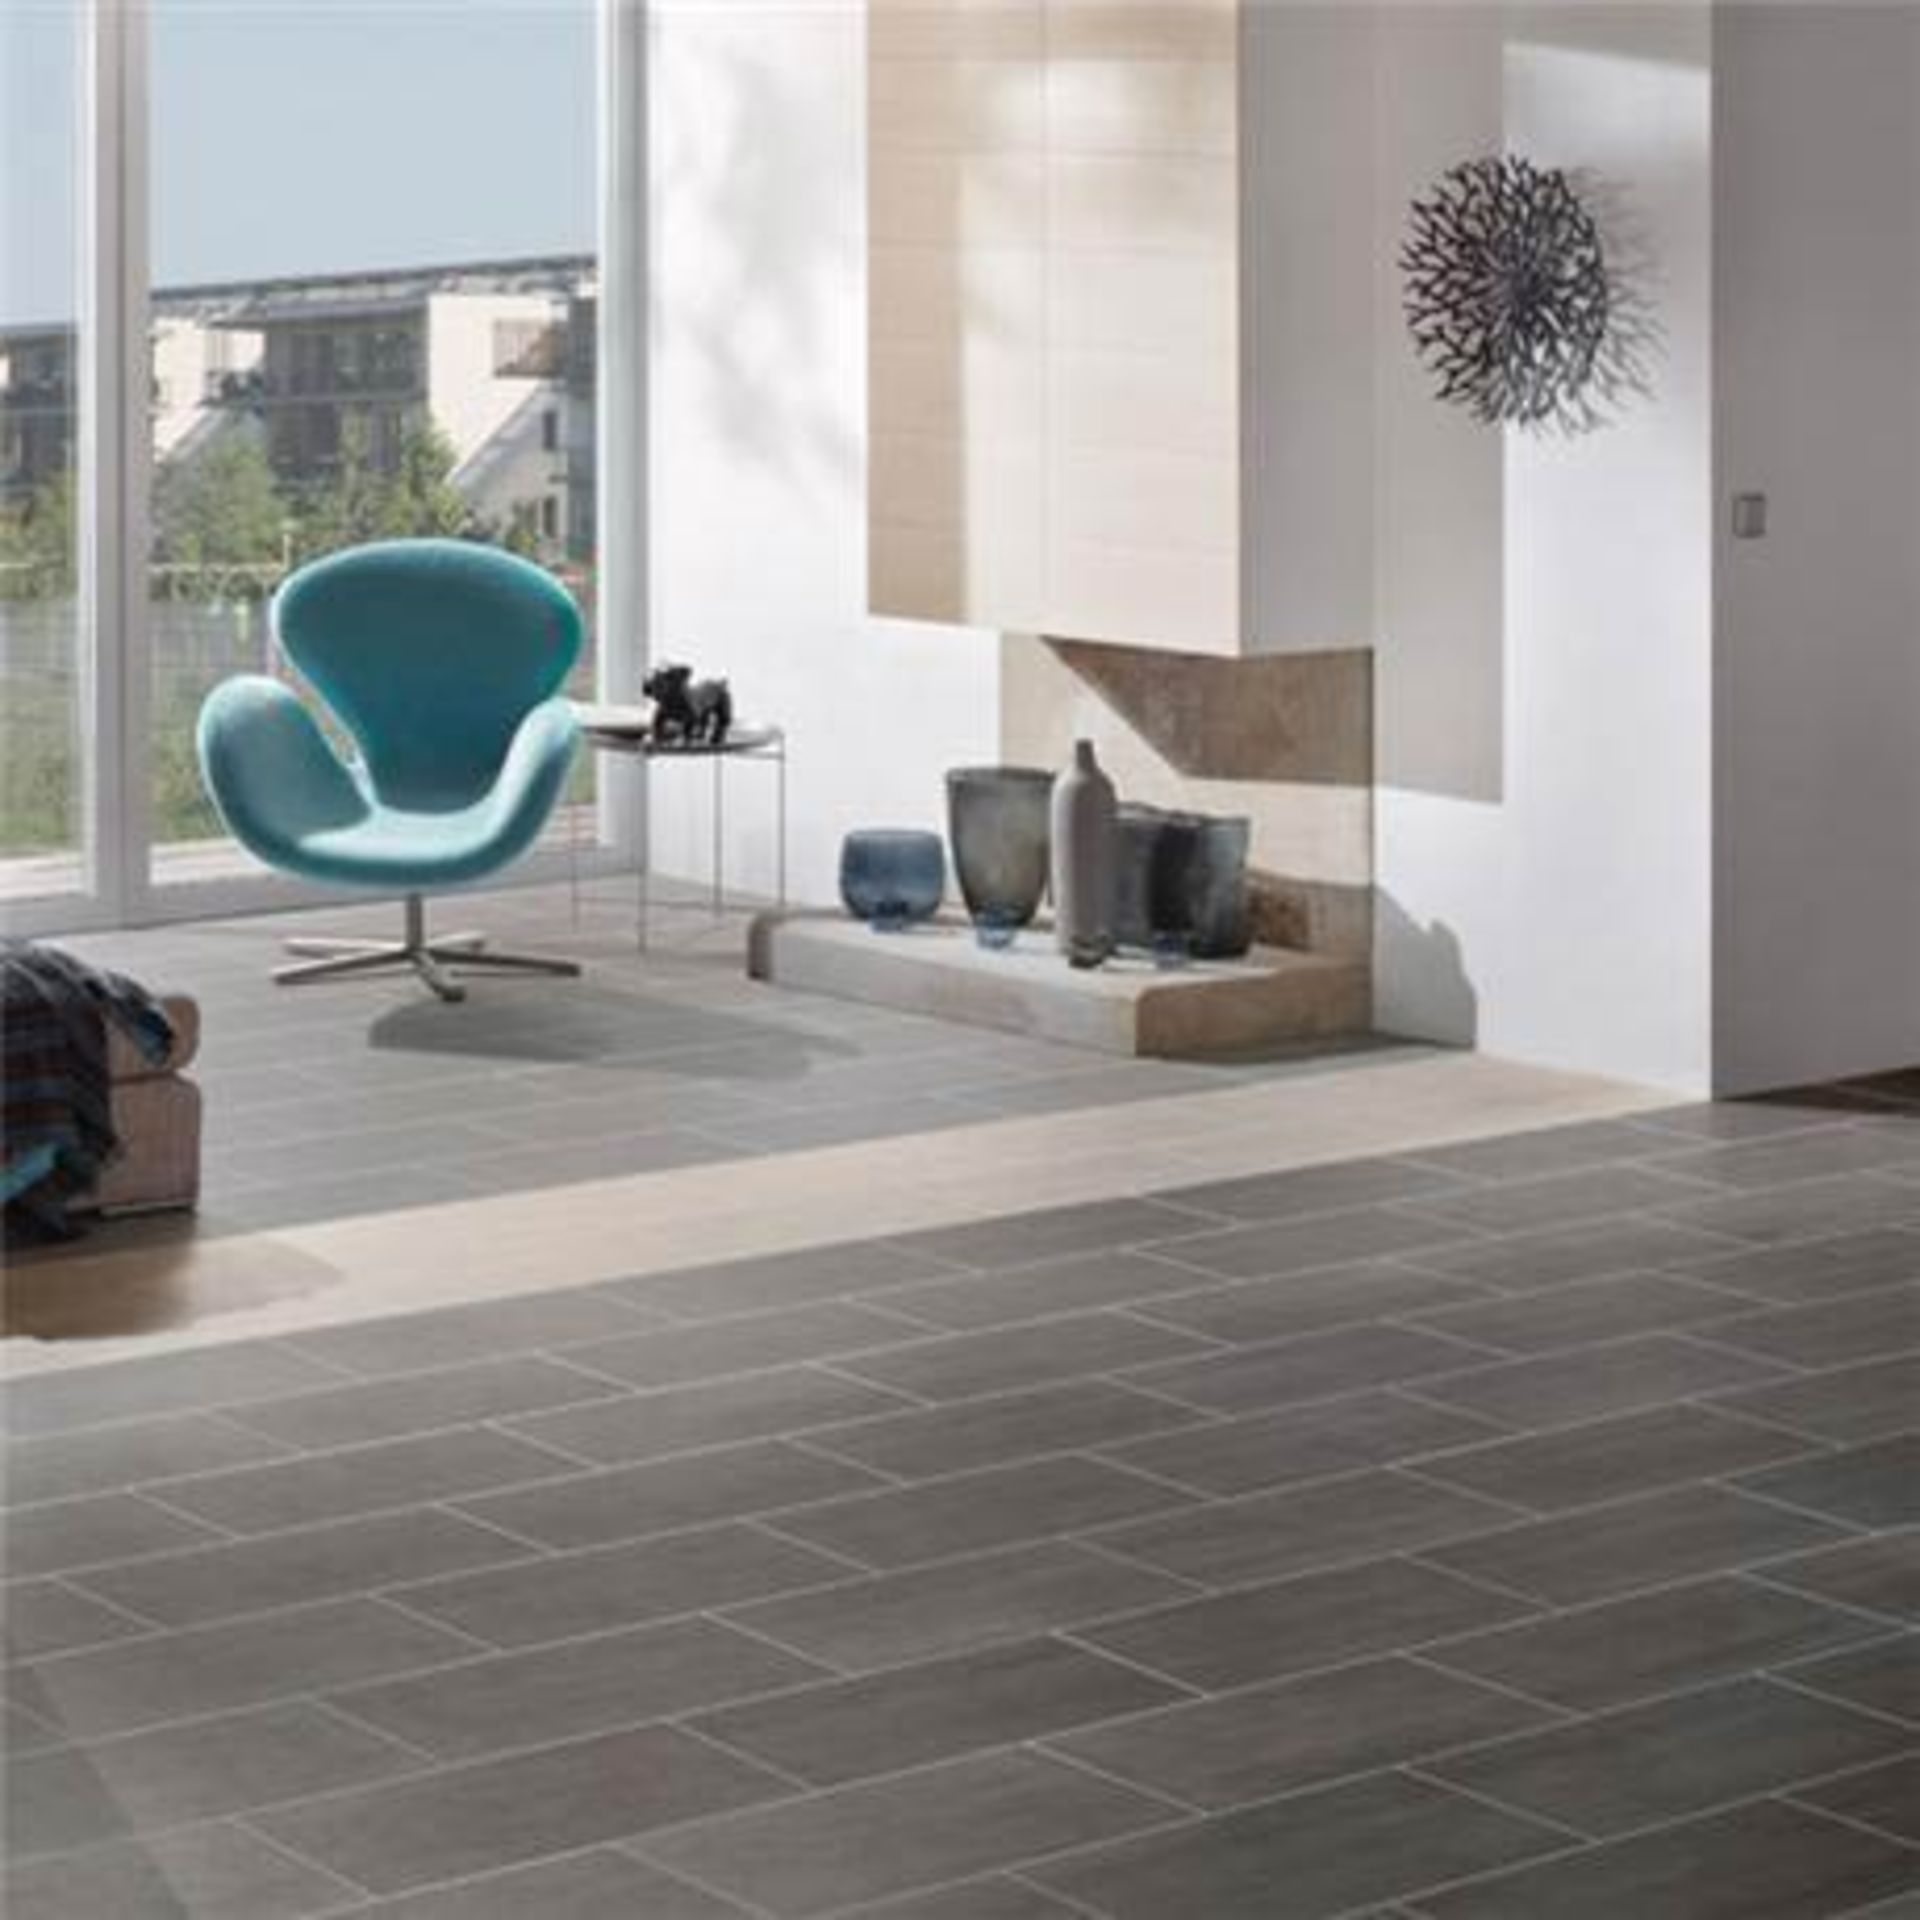 6 x Boxes of RAK Porcelain Floor or Wall Tiles - Dolomit Black - 20 x 50 cm Tiles Covering a Total - Image 9 of 9